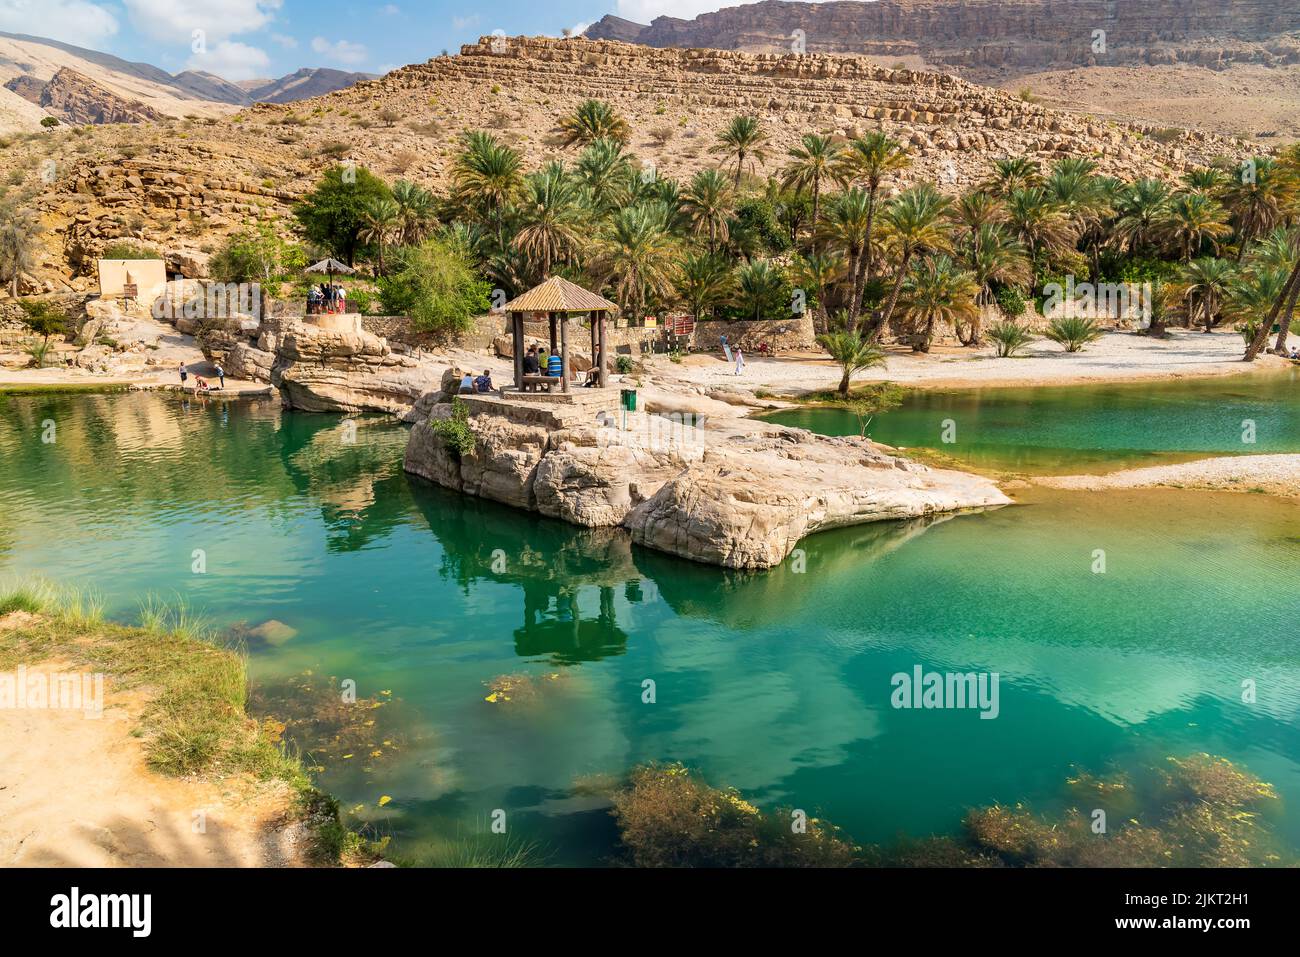 View of the Wadi Bani Khalid oasis in the desert in Sultanate of Oman. Stock Photo